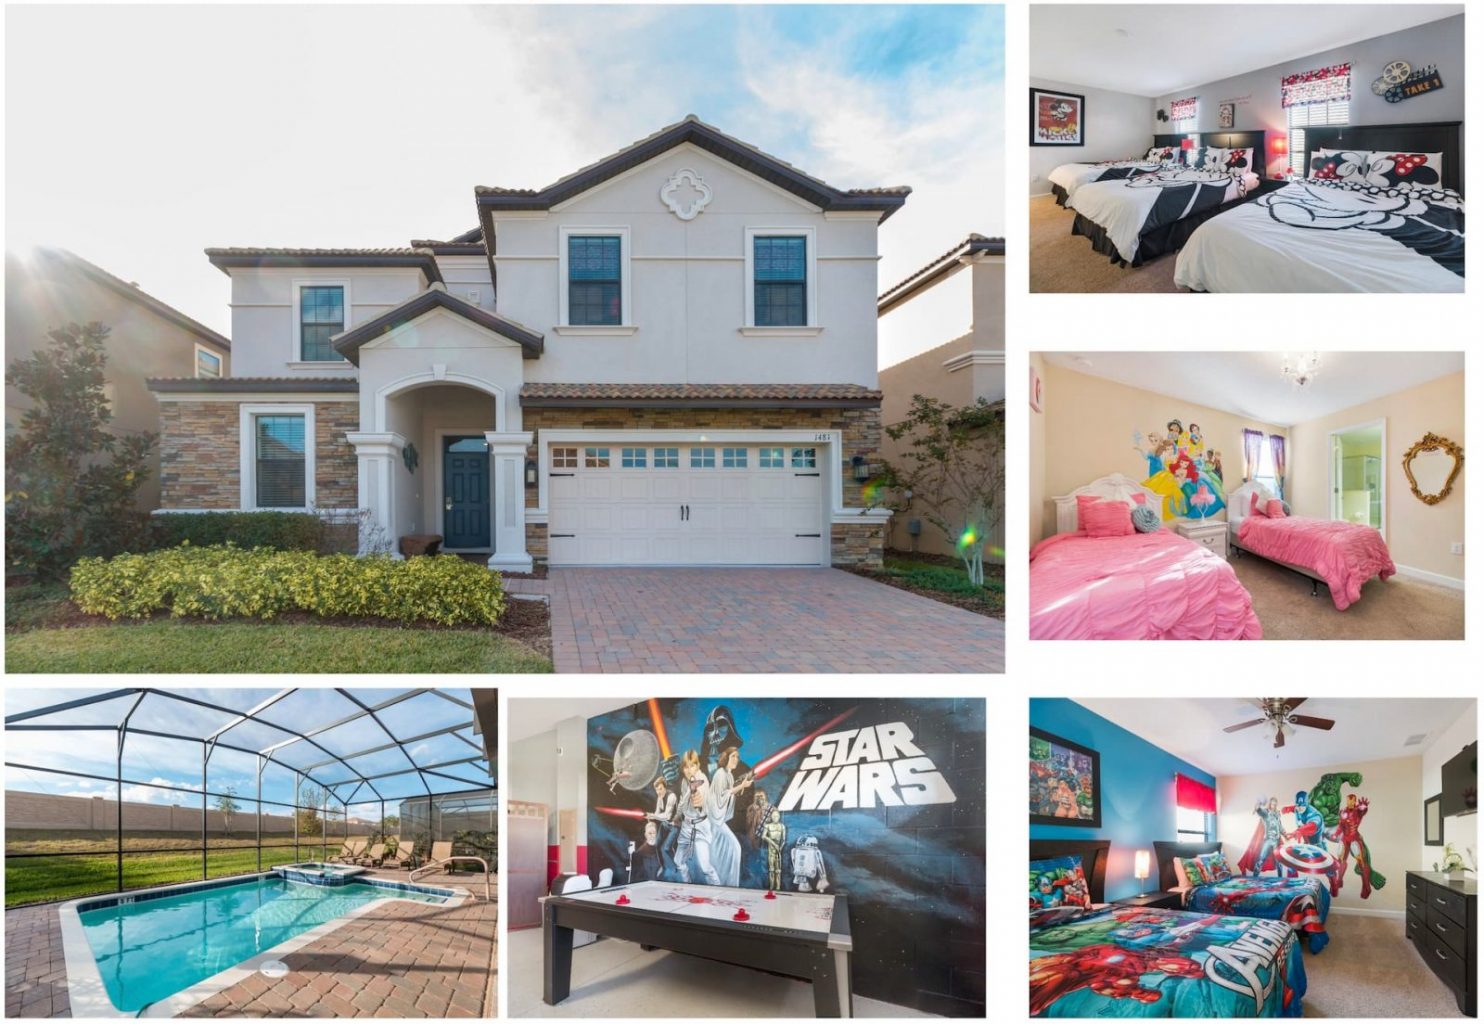 multiple pictures of the minnies house of champions vacation rental near Disney including the outside of the house, the pool, the game room, and the bedrooms